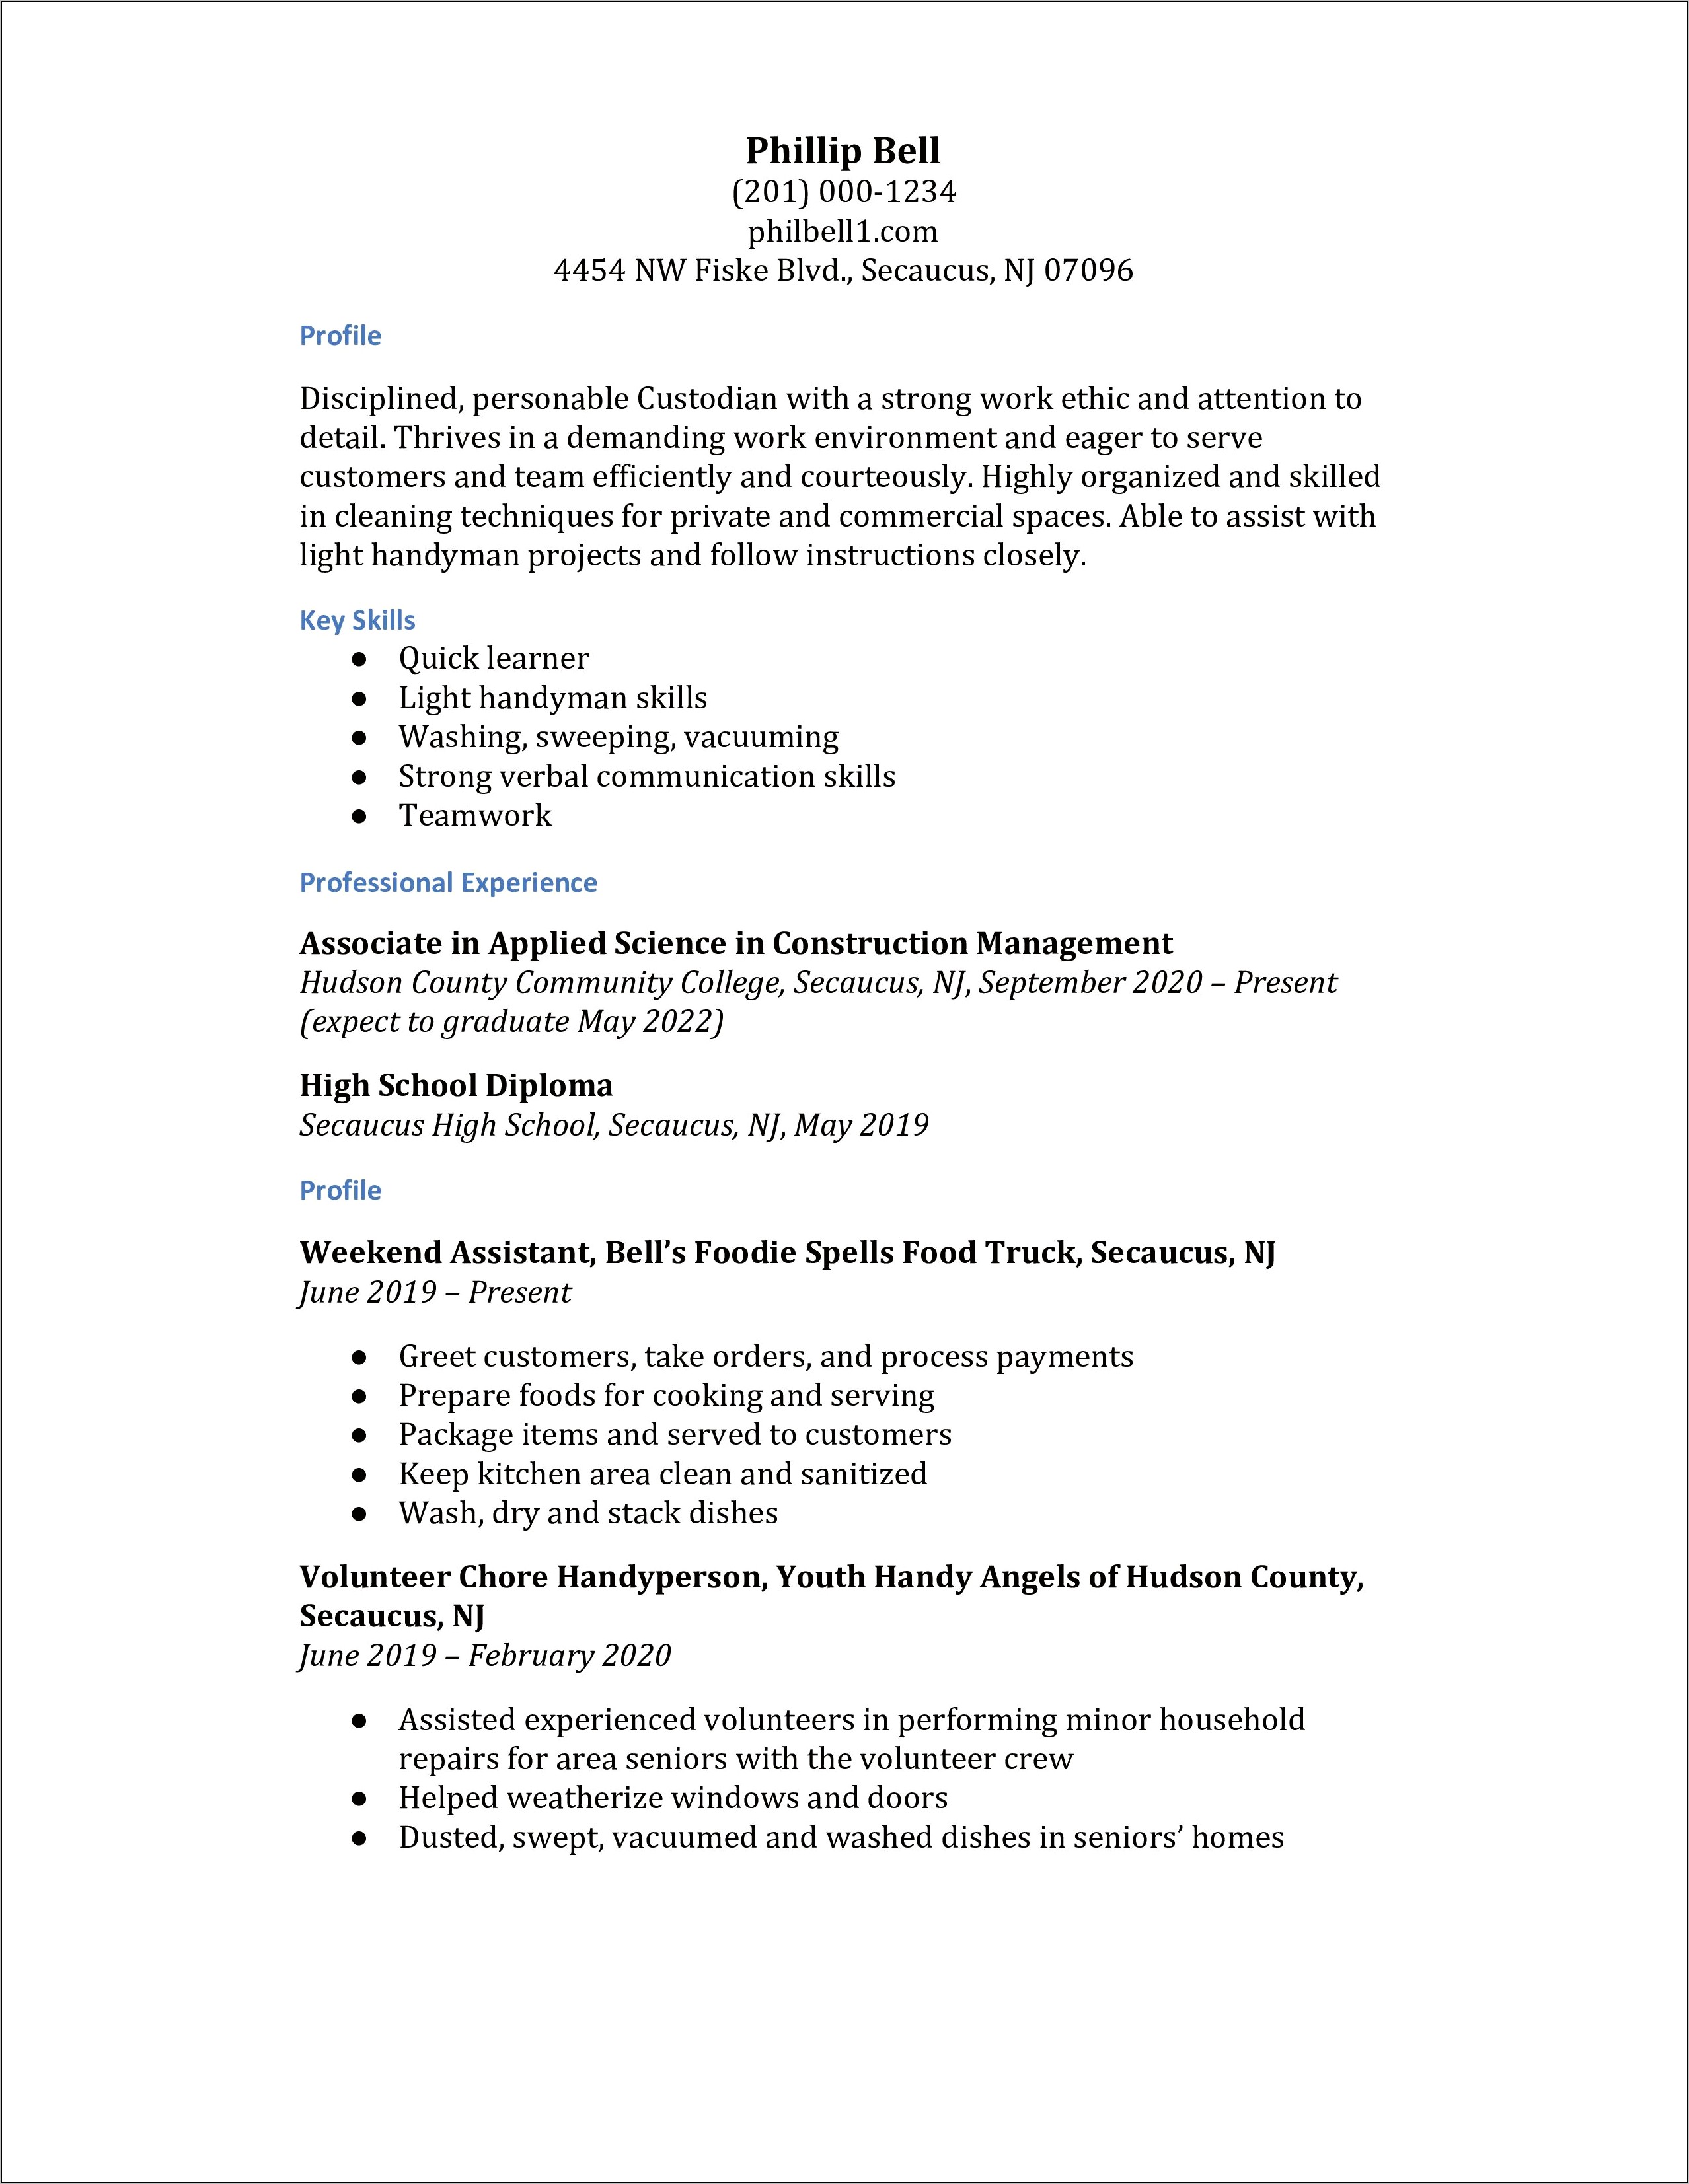 Simple Sample Church Resume For Janitor